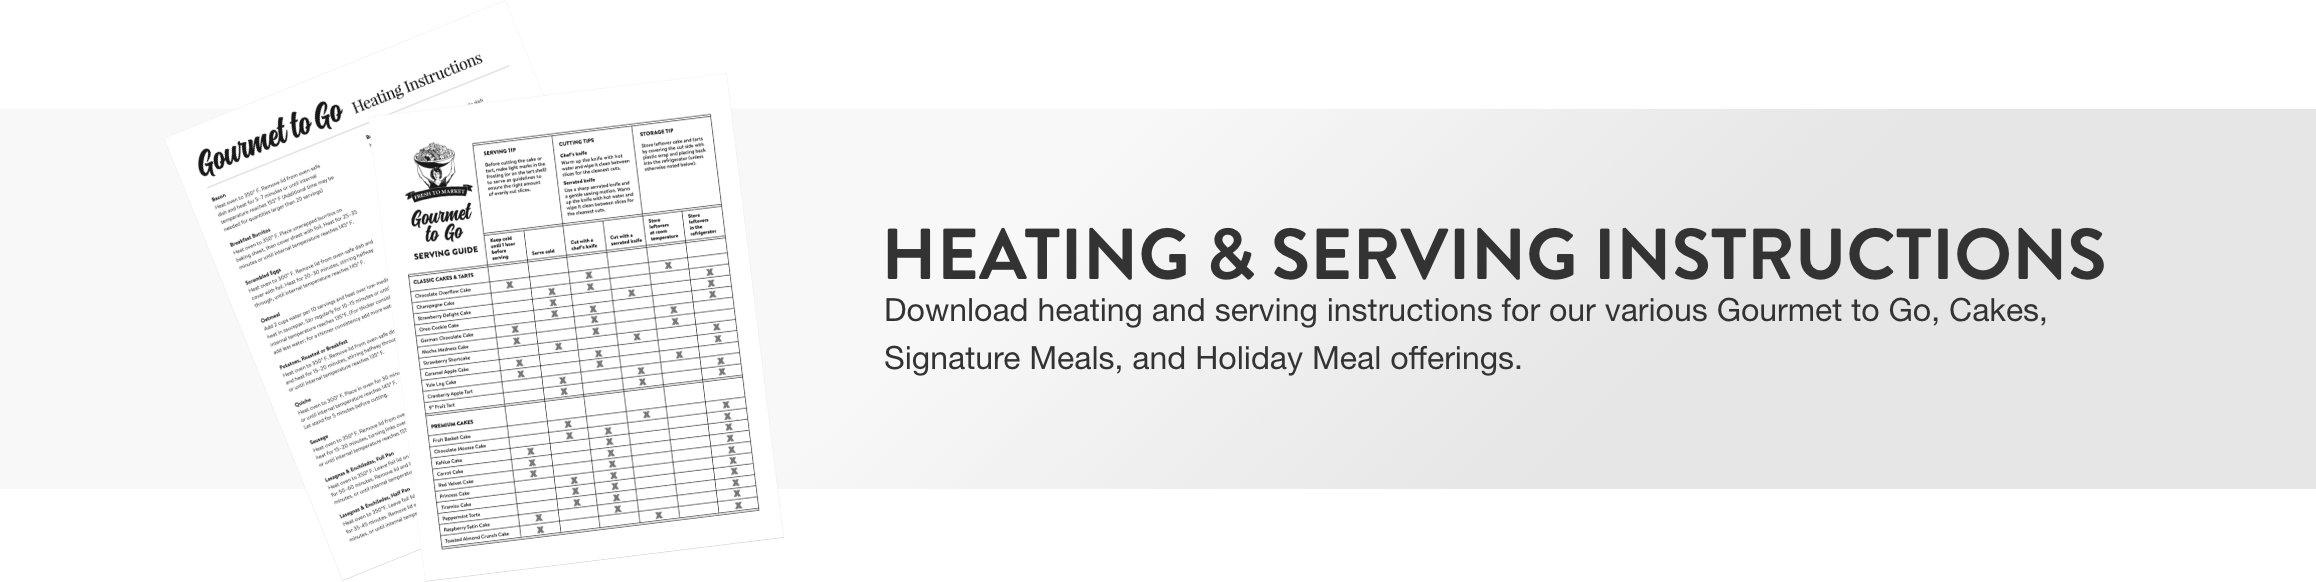 Heating & Serving Instructions